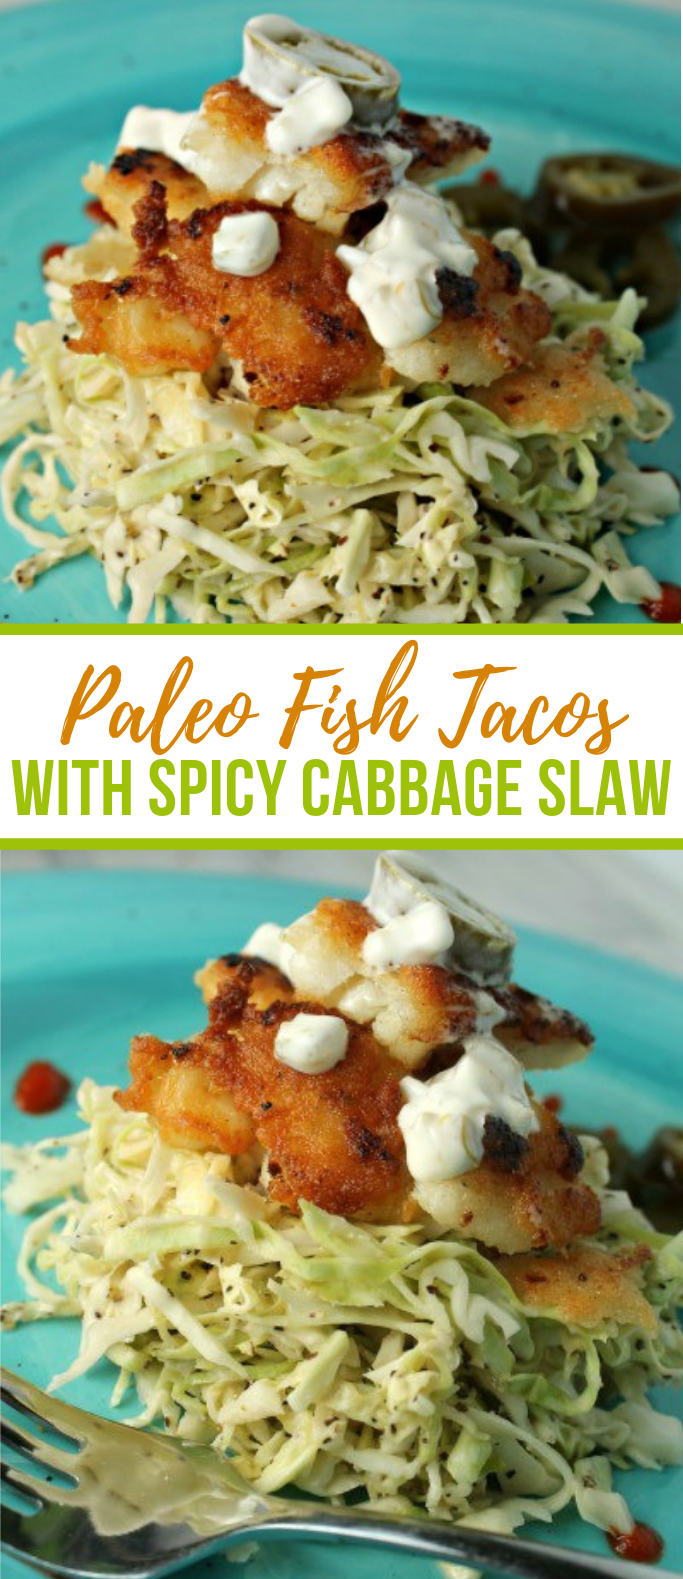 Paleo Fish Tacos with Spicy Cabbage Slaw #dinner #meals